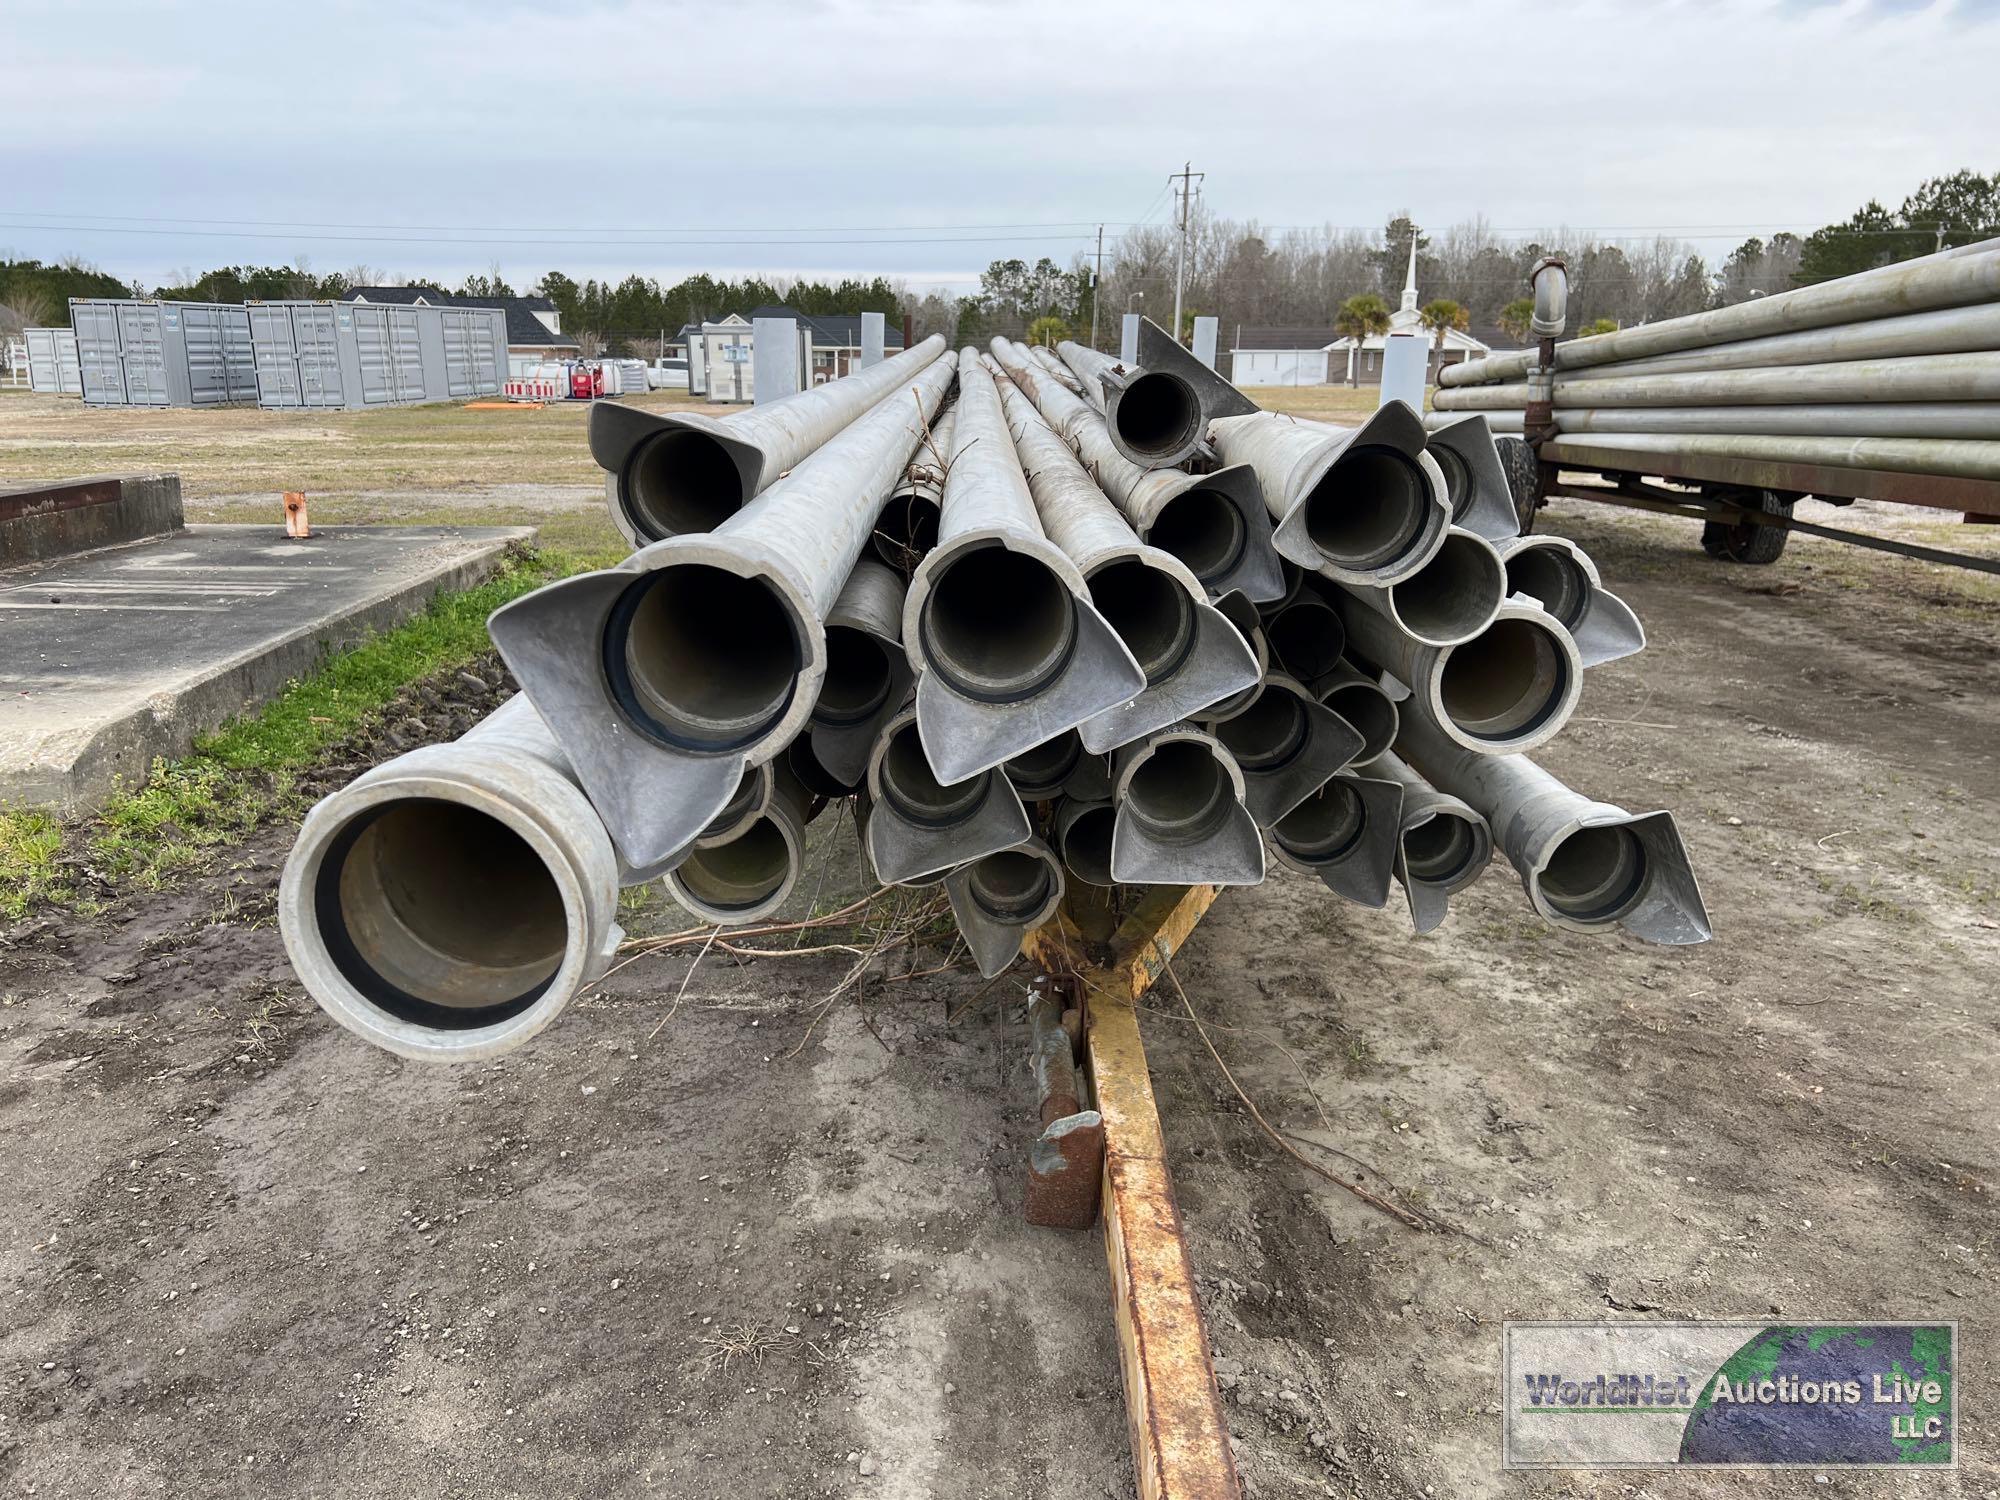 LOT OF 30' IRRIGATION PIPE ON TRAILER